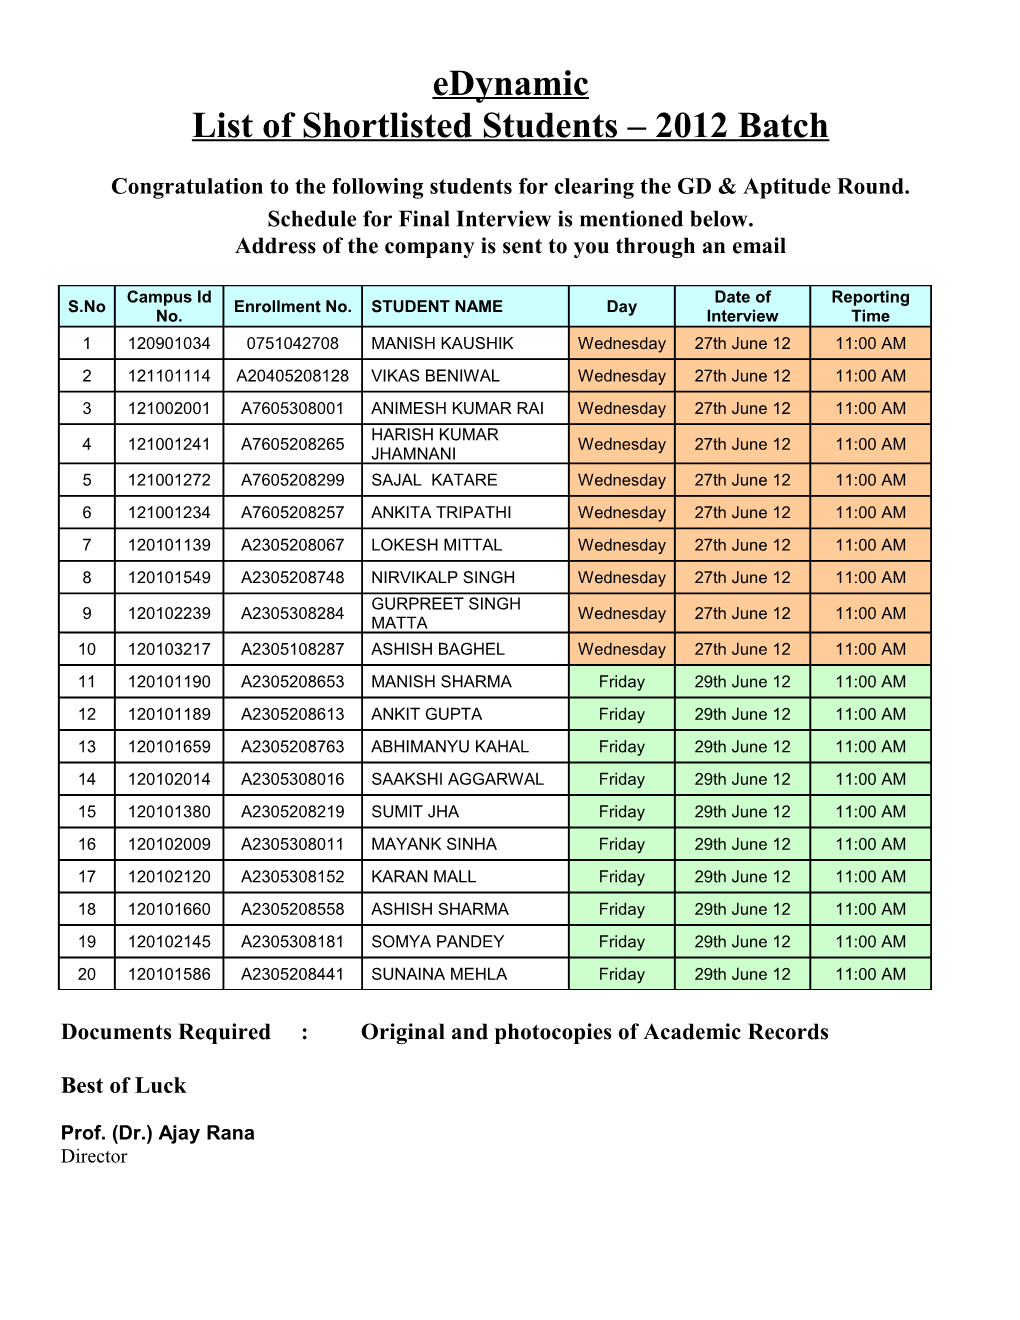 List of Shortlisted Students 2012 Batch